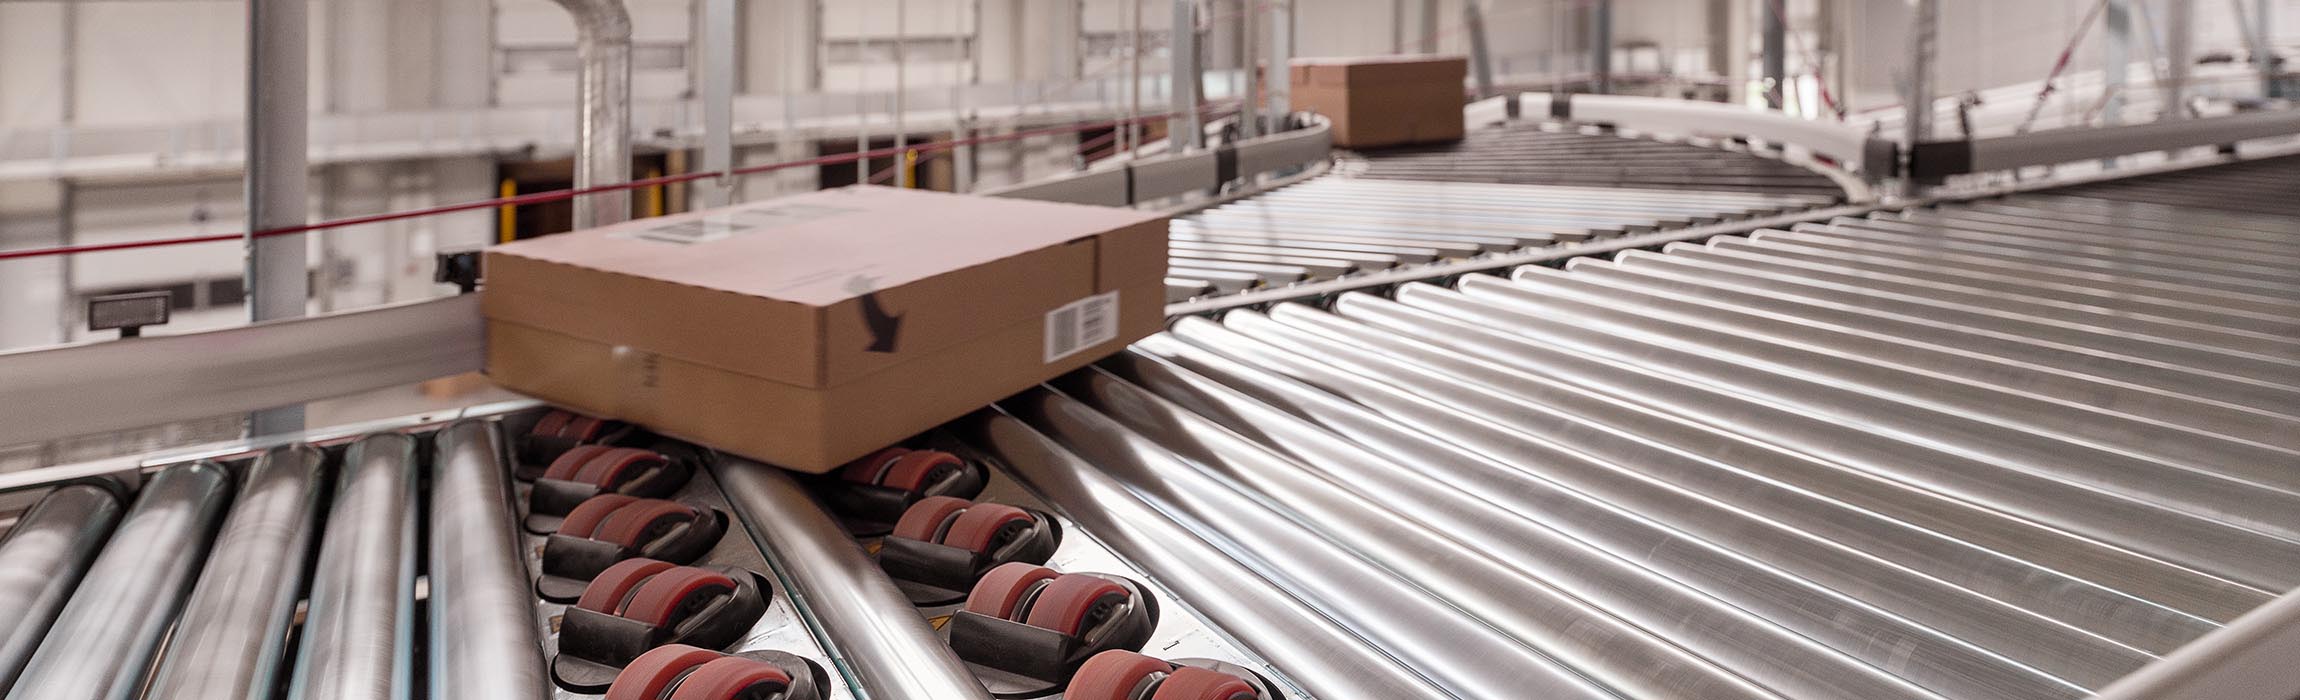 Precise and qualitative intralogistics for your high-performance conveyors and sorters.